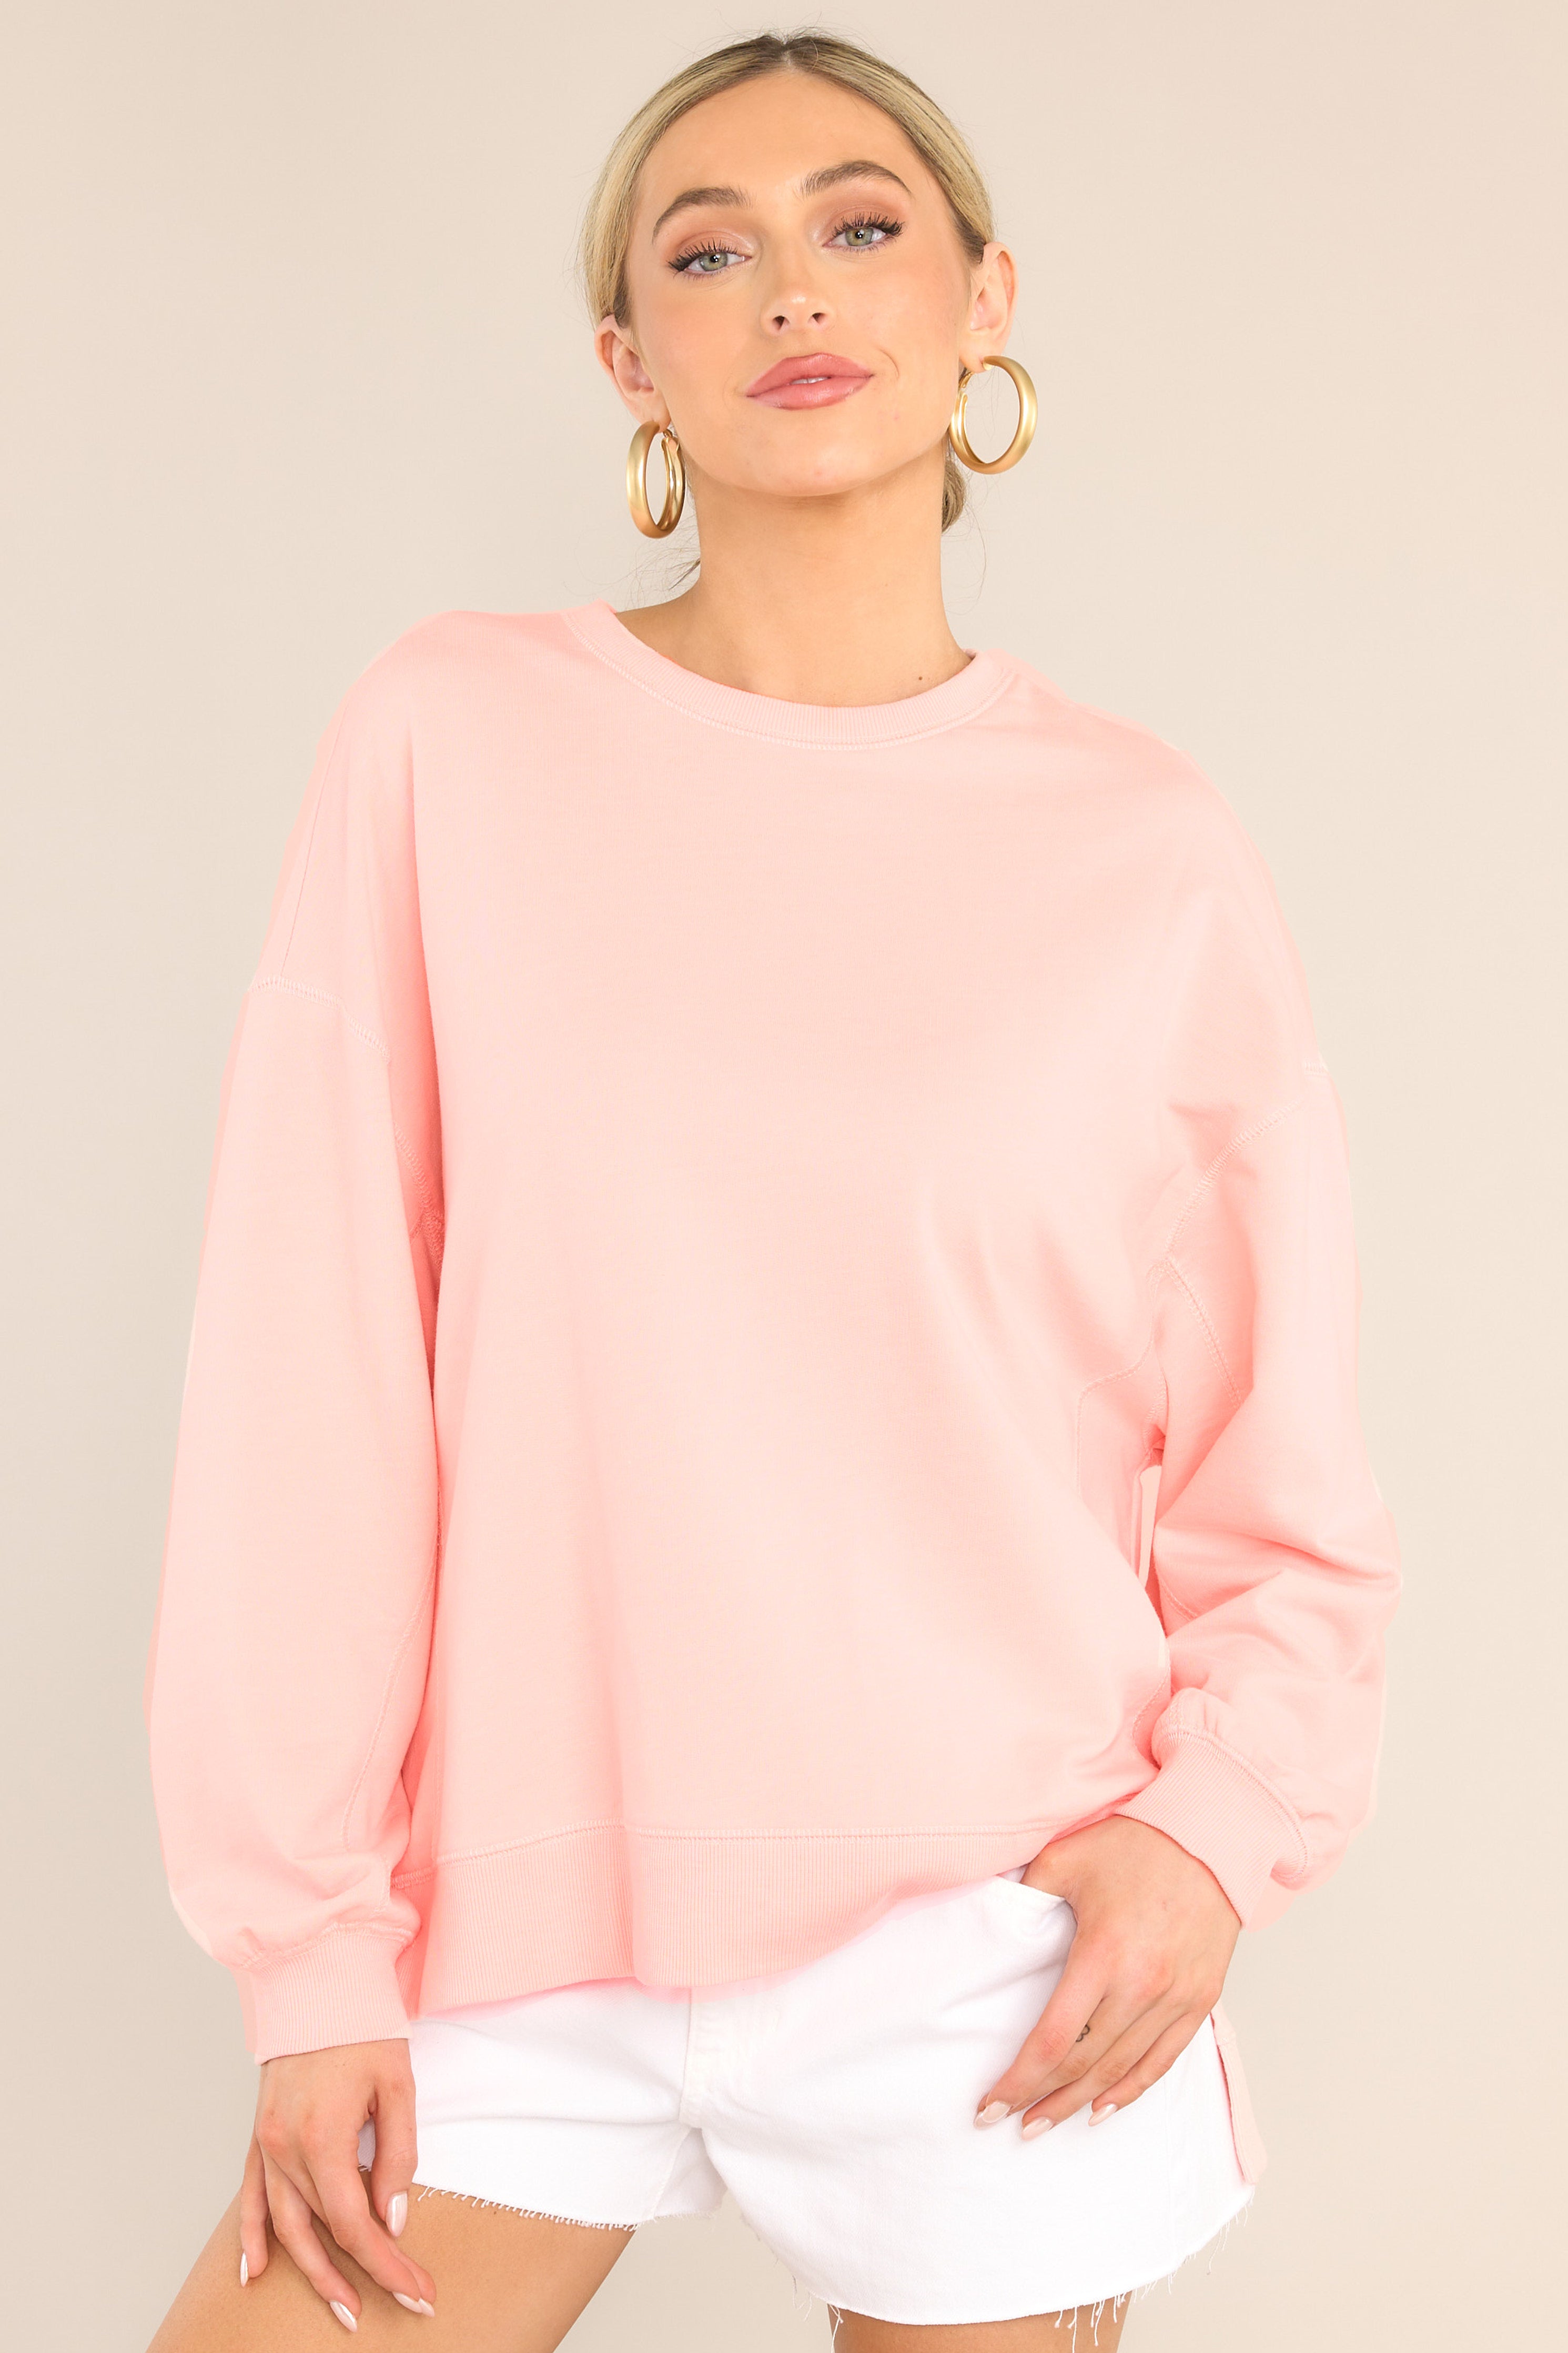 This pink top features a ribbed crew neckline, dropped shoulders, exposed seams, ribbed cuffed sleeves, and a ribbed split high-low hemline.